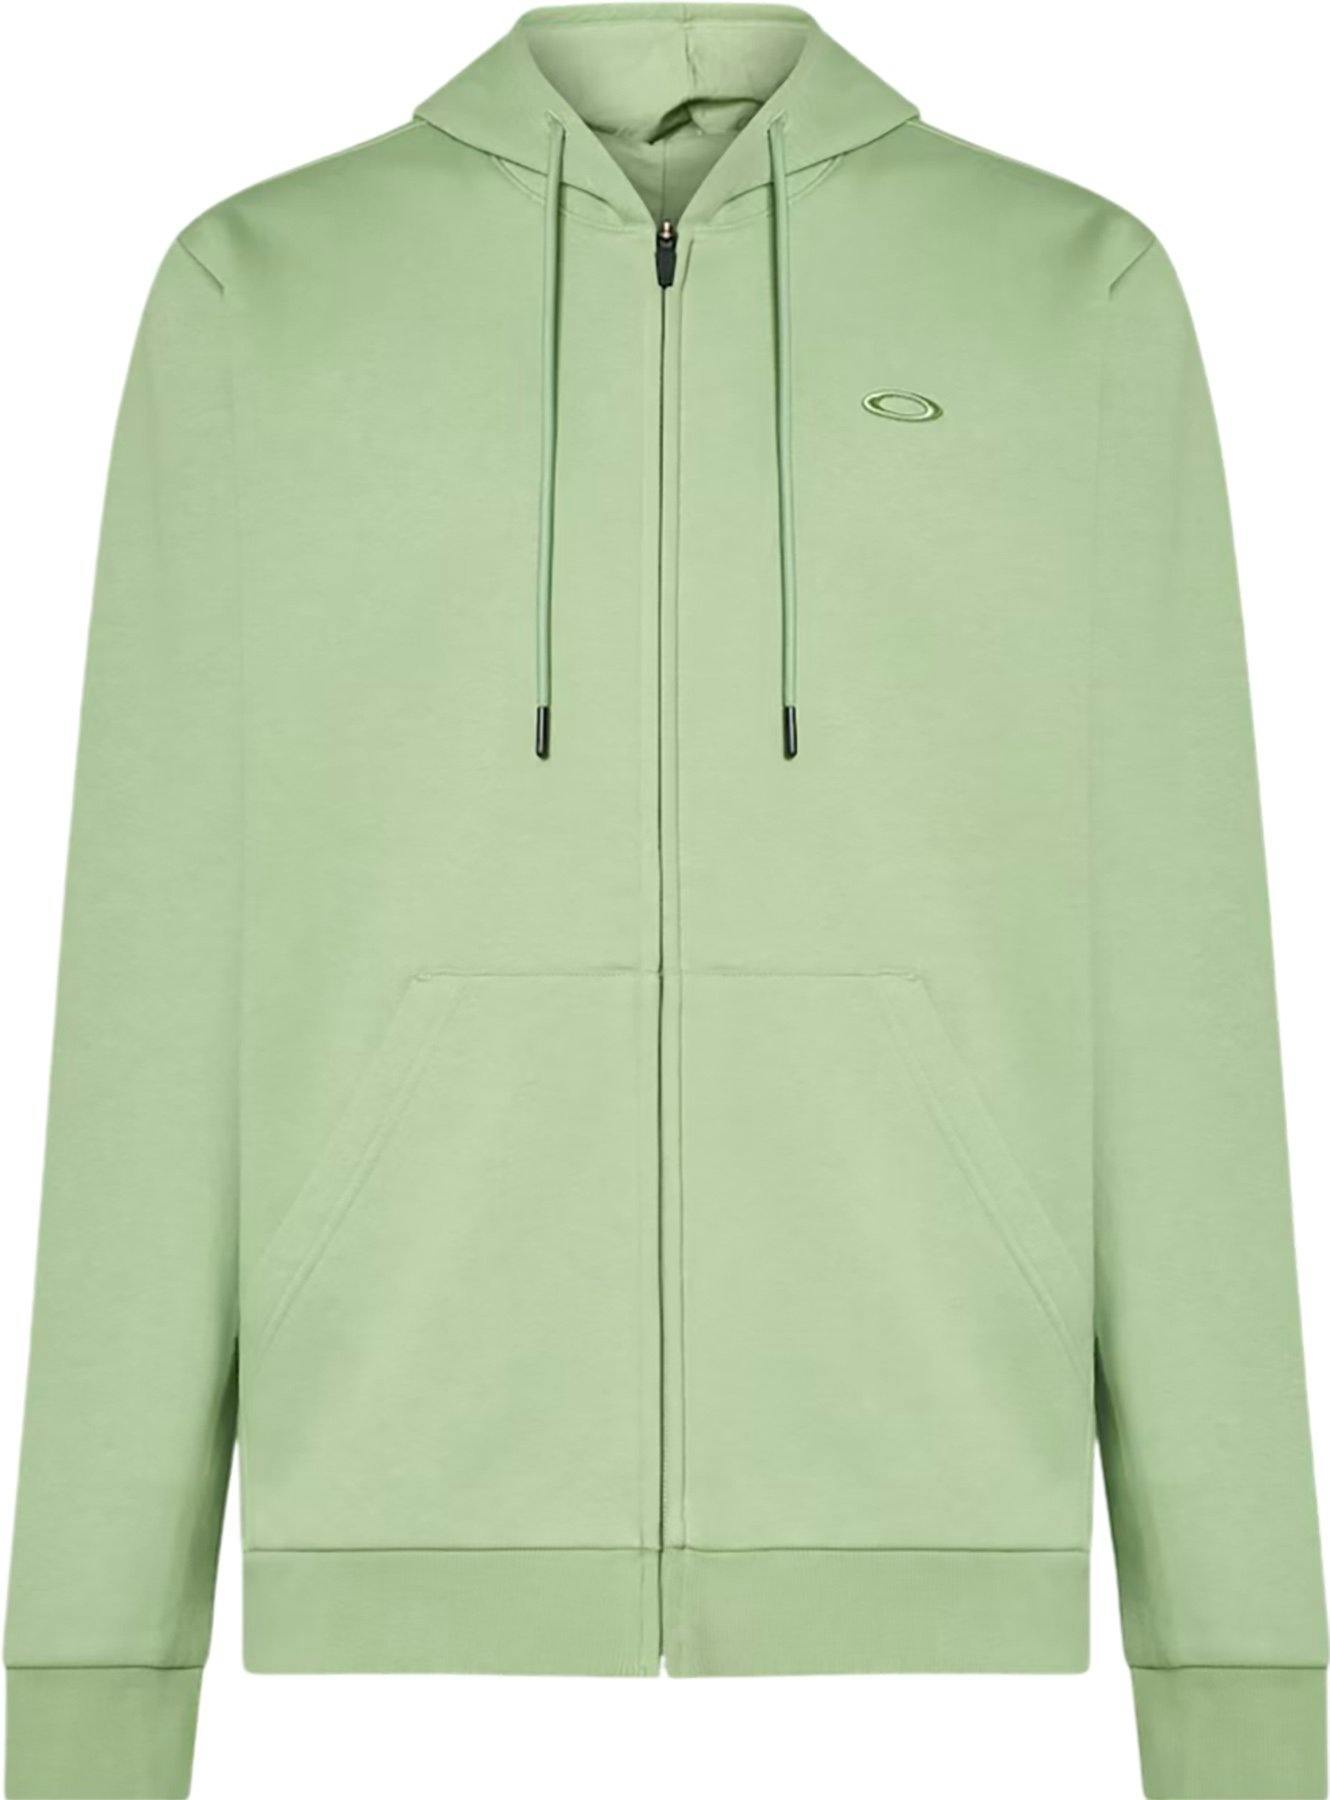 Product image for Relax 2.0 Full Zip Hoodie - Men's